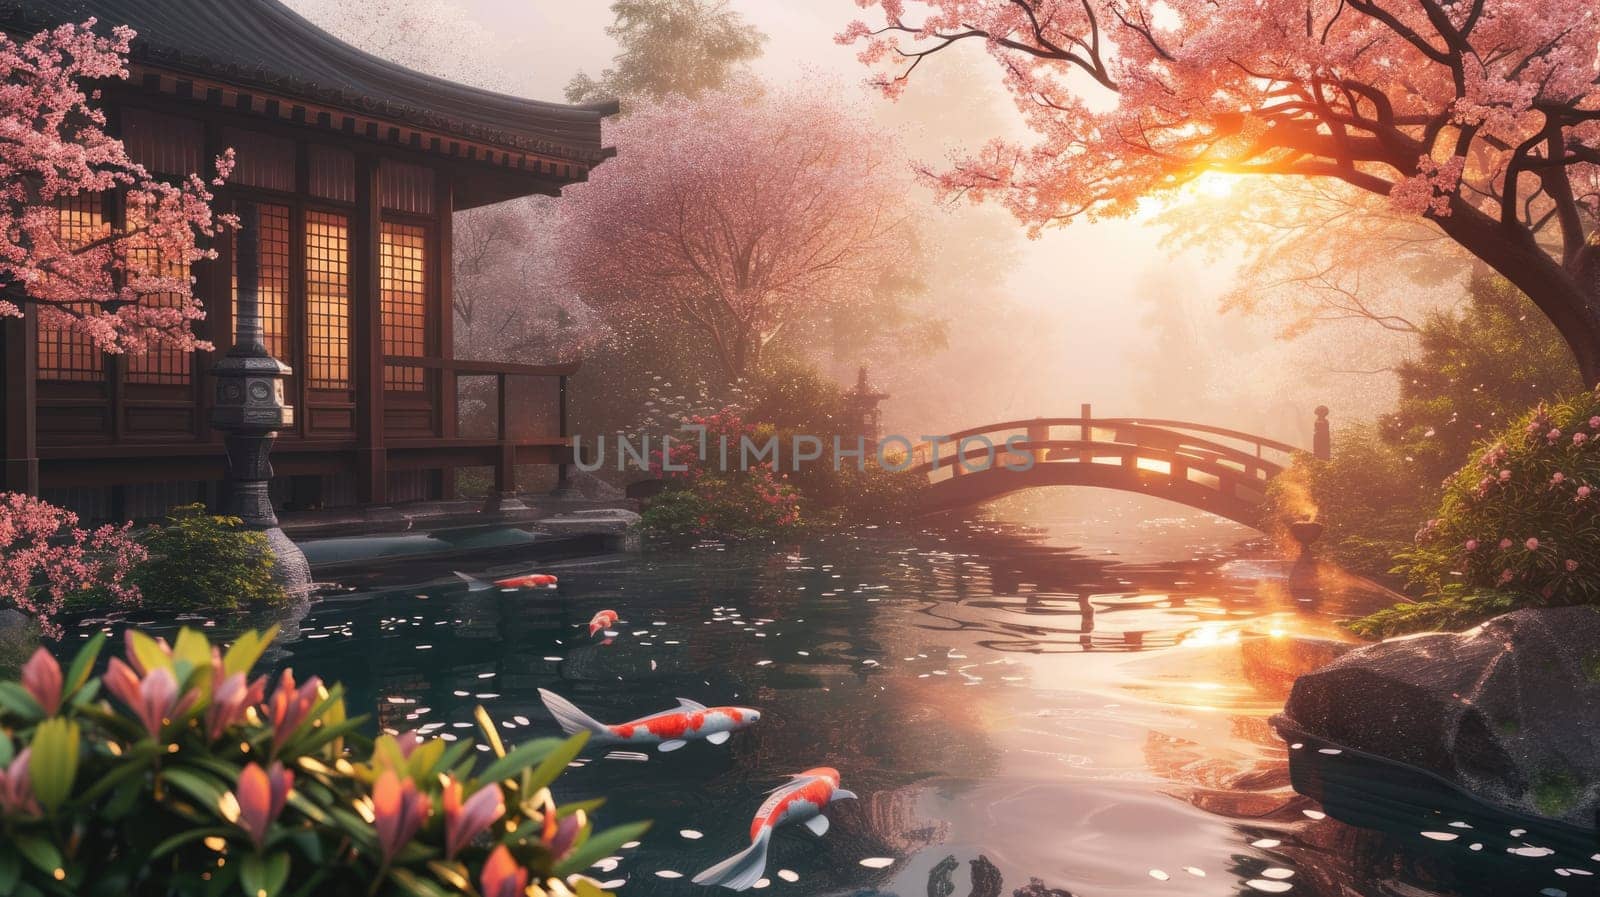 A serene Zen garden at sunrise, with a gently flowing stream, cherry blossoms in full bloom, and a quaint wooden bridge. Resplendent.